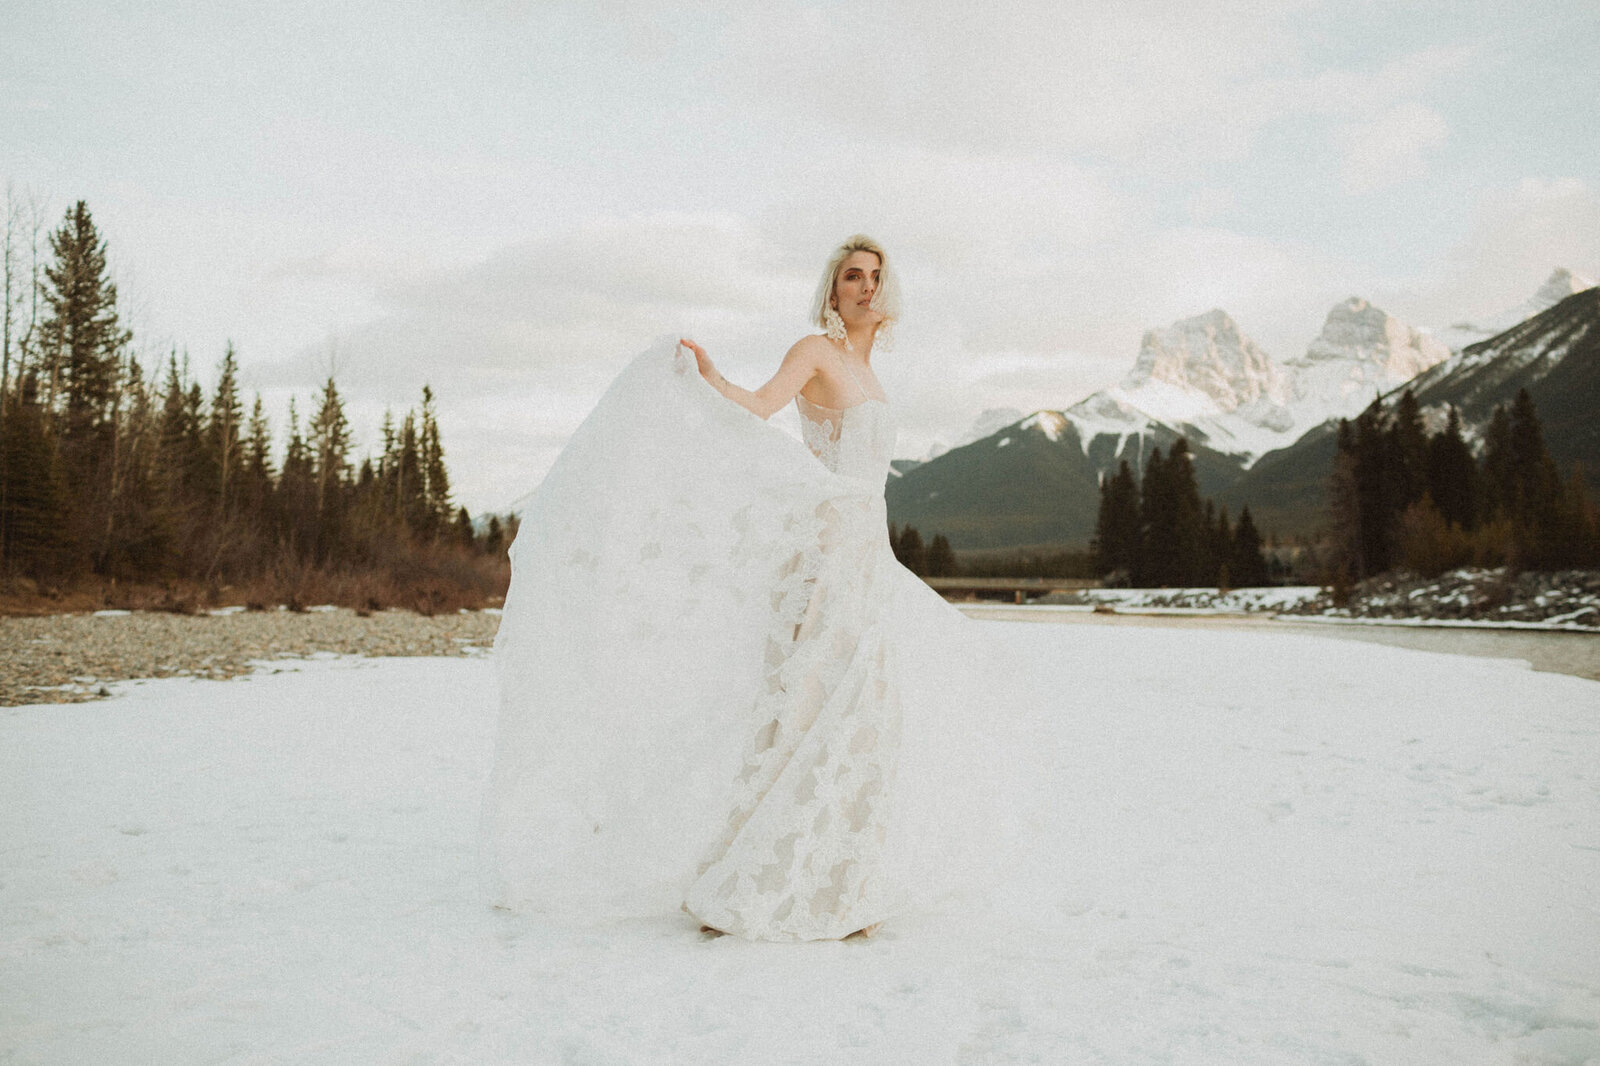 bride in white lace wedding dress walking outdoors with mountains behind